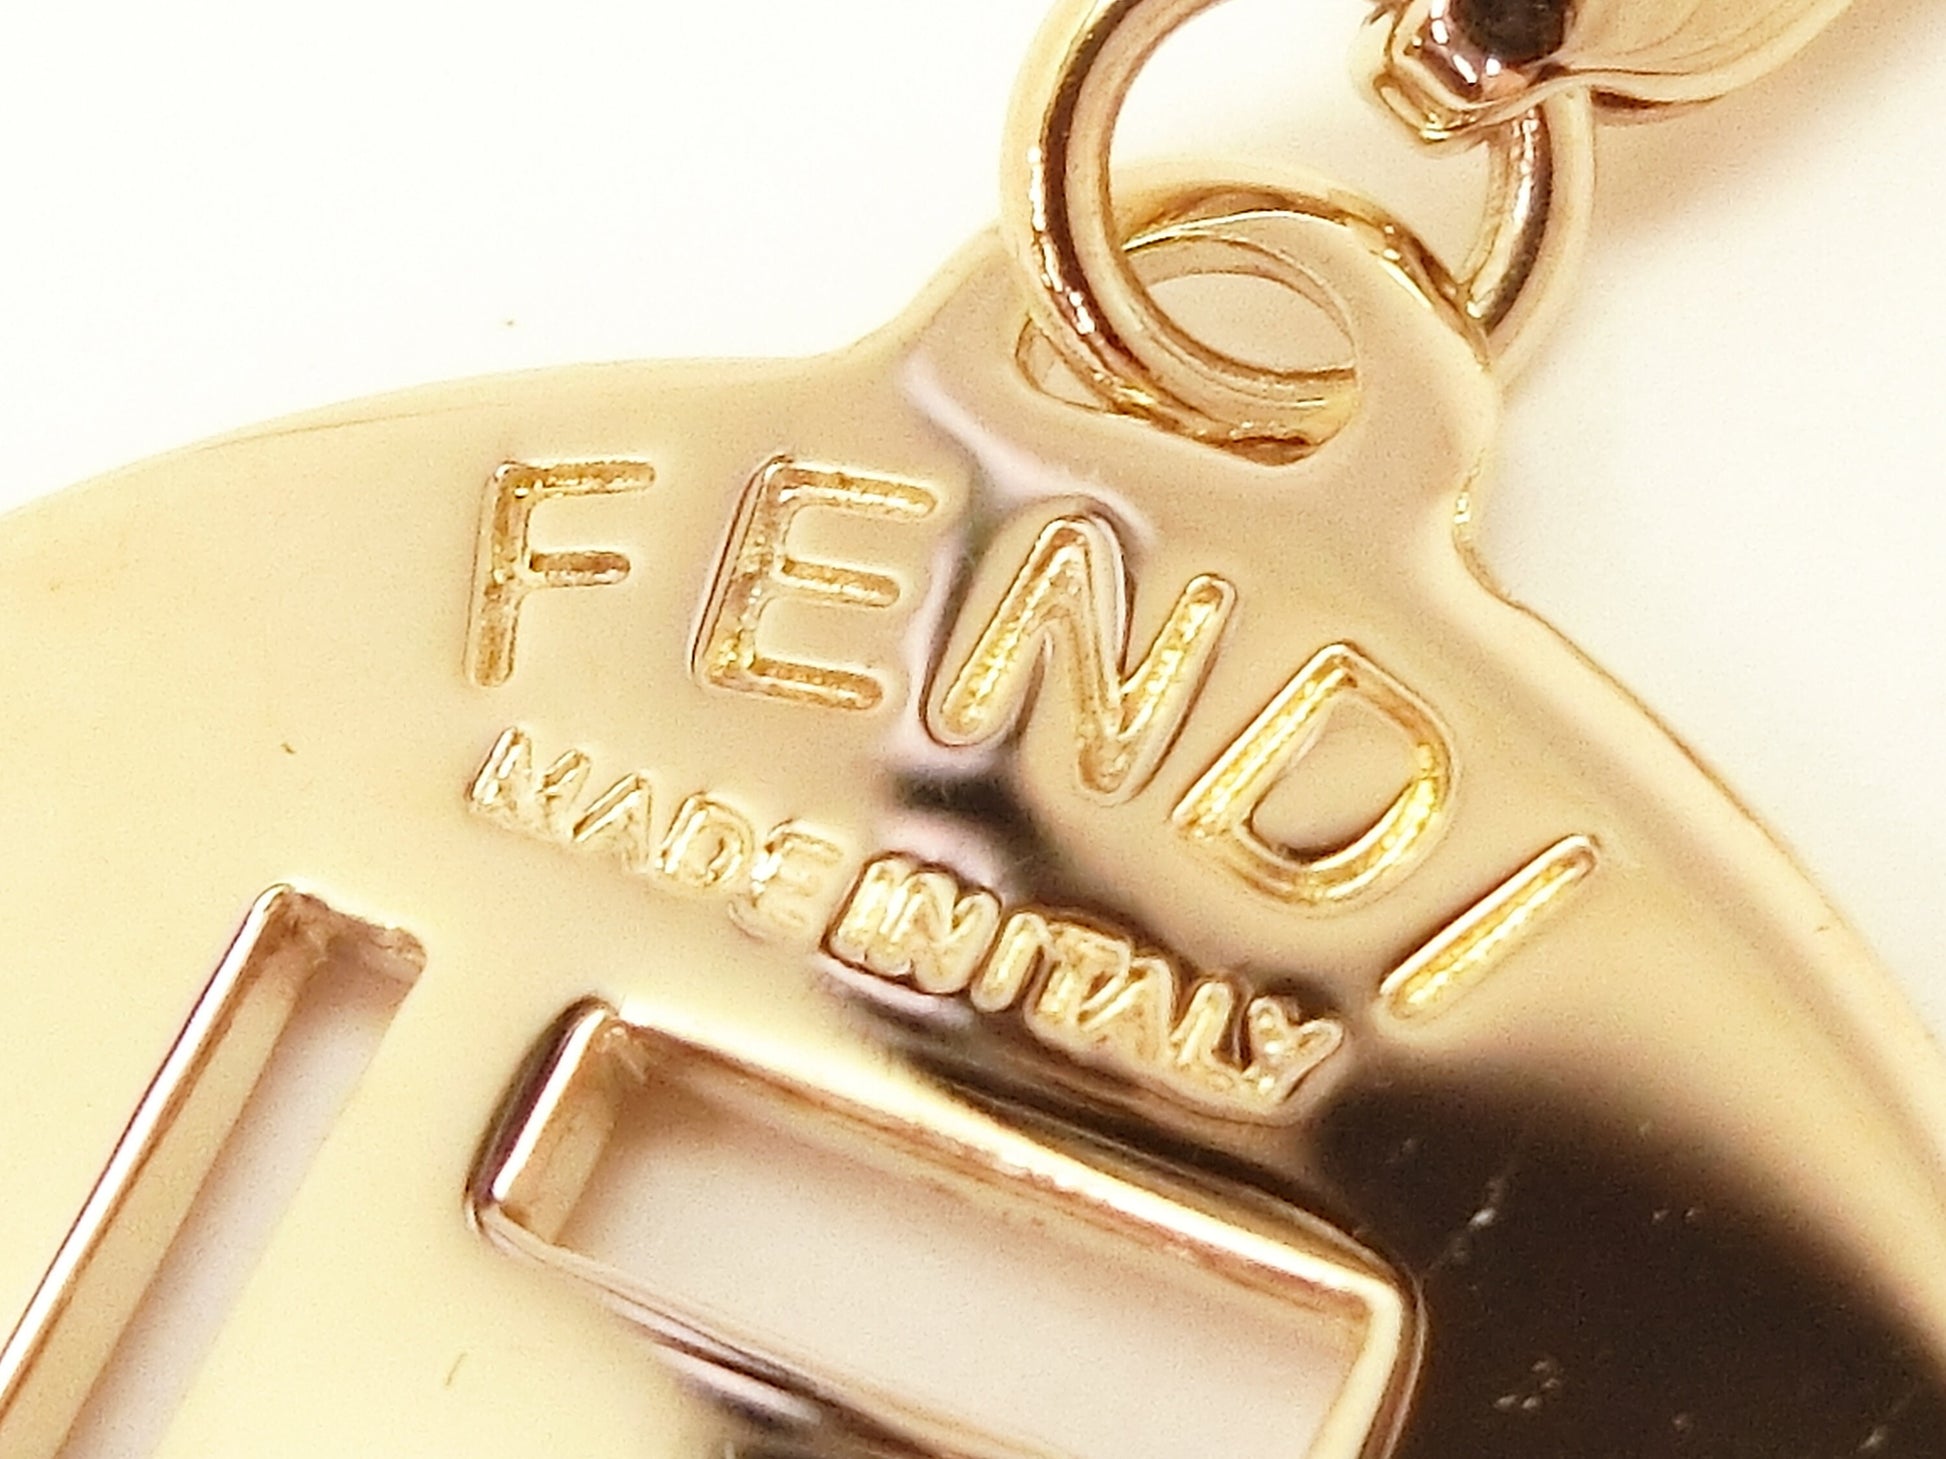 FENDI Vintage 100% Authentic Genuine, ID Identification Tag Necklace with Alphabet "K" and "Capricorn", 1990's